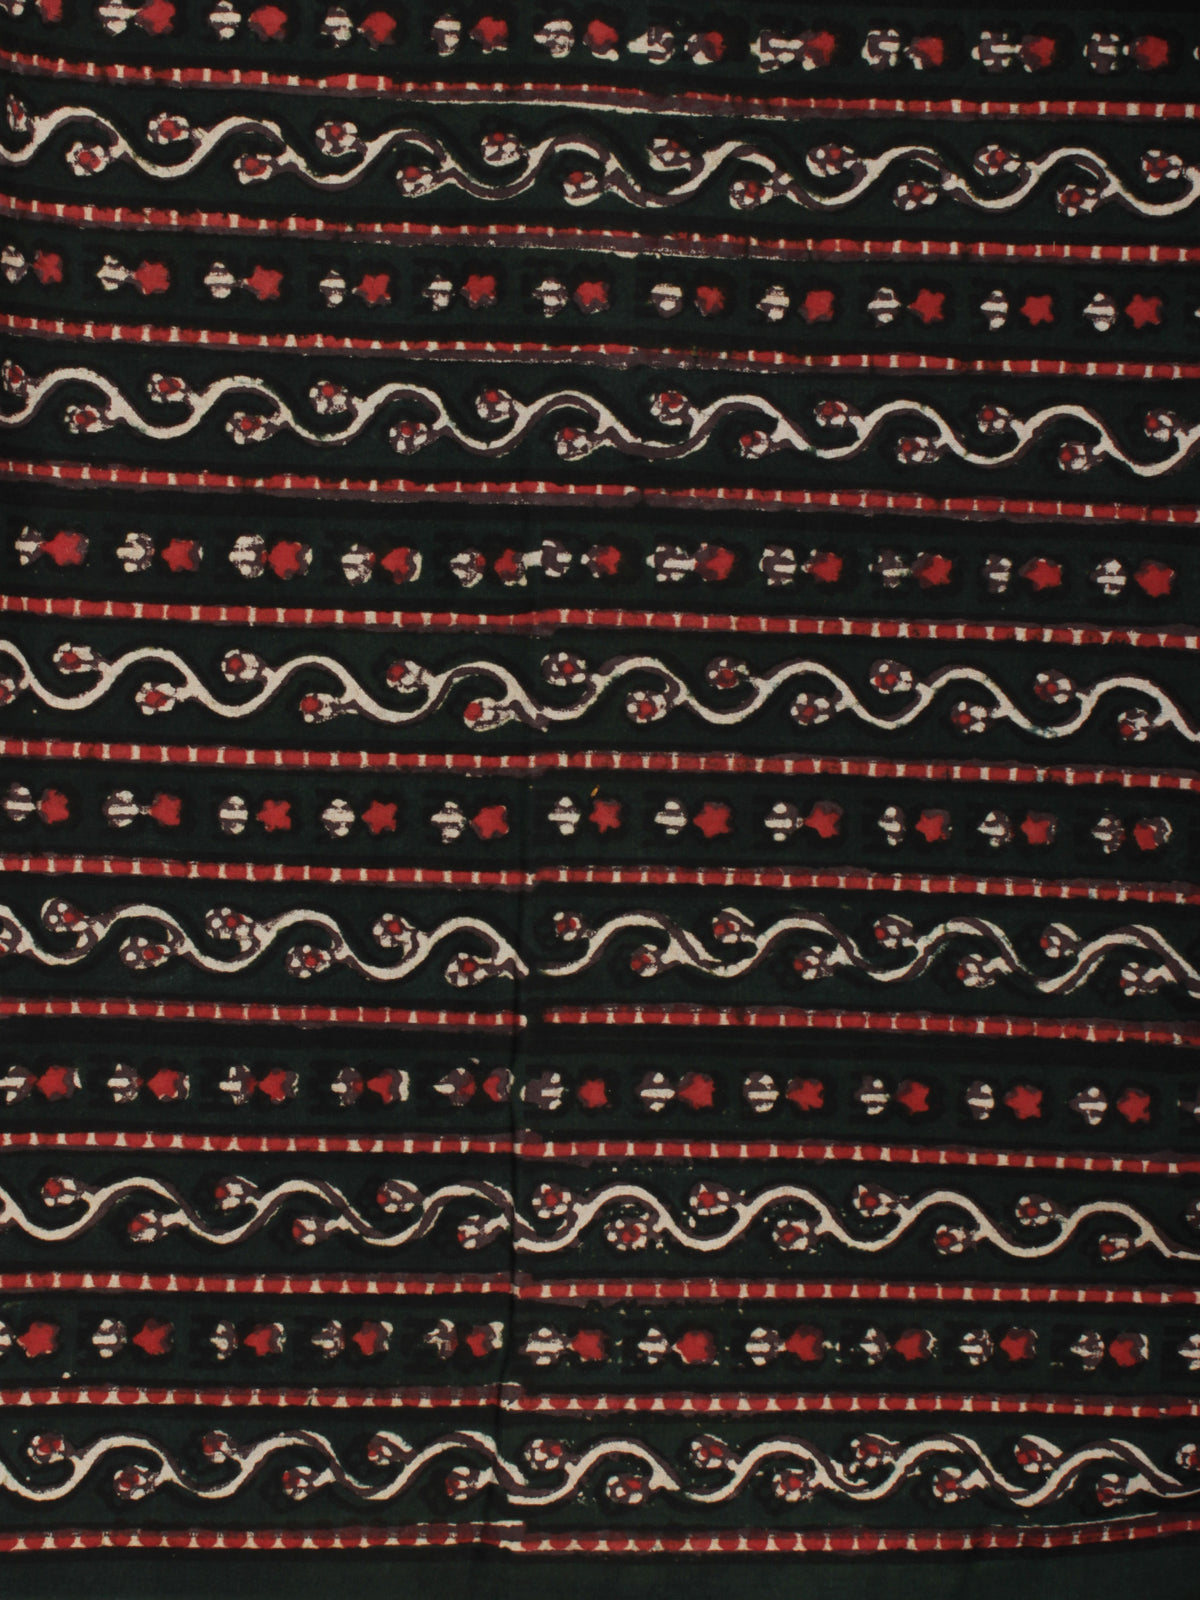 Bottle Green Ivory Red Ajrakh Hand Block Printed Cotton Fabric Per Meter - F003F2114